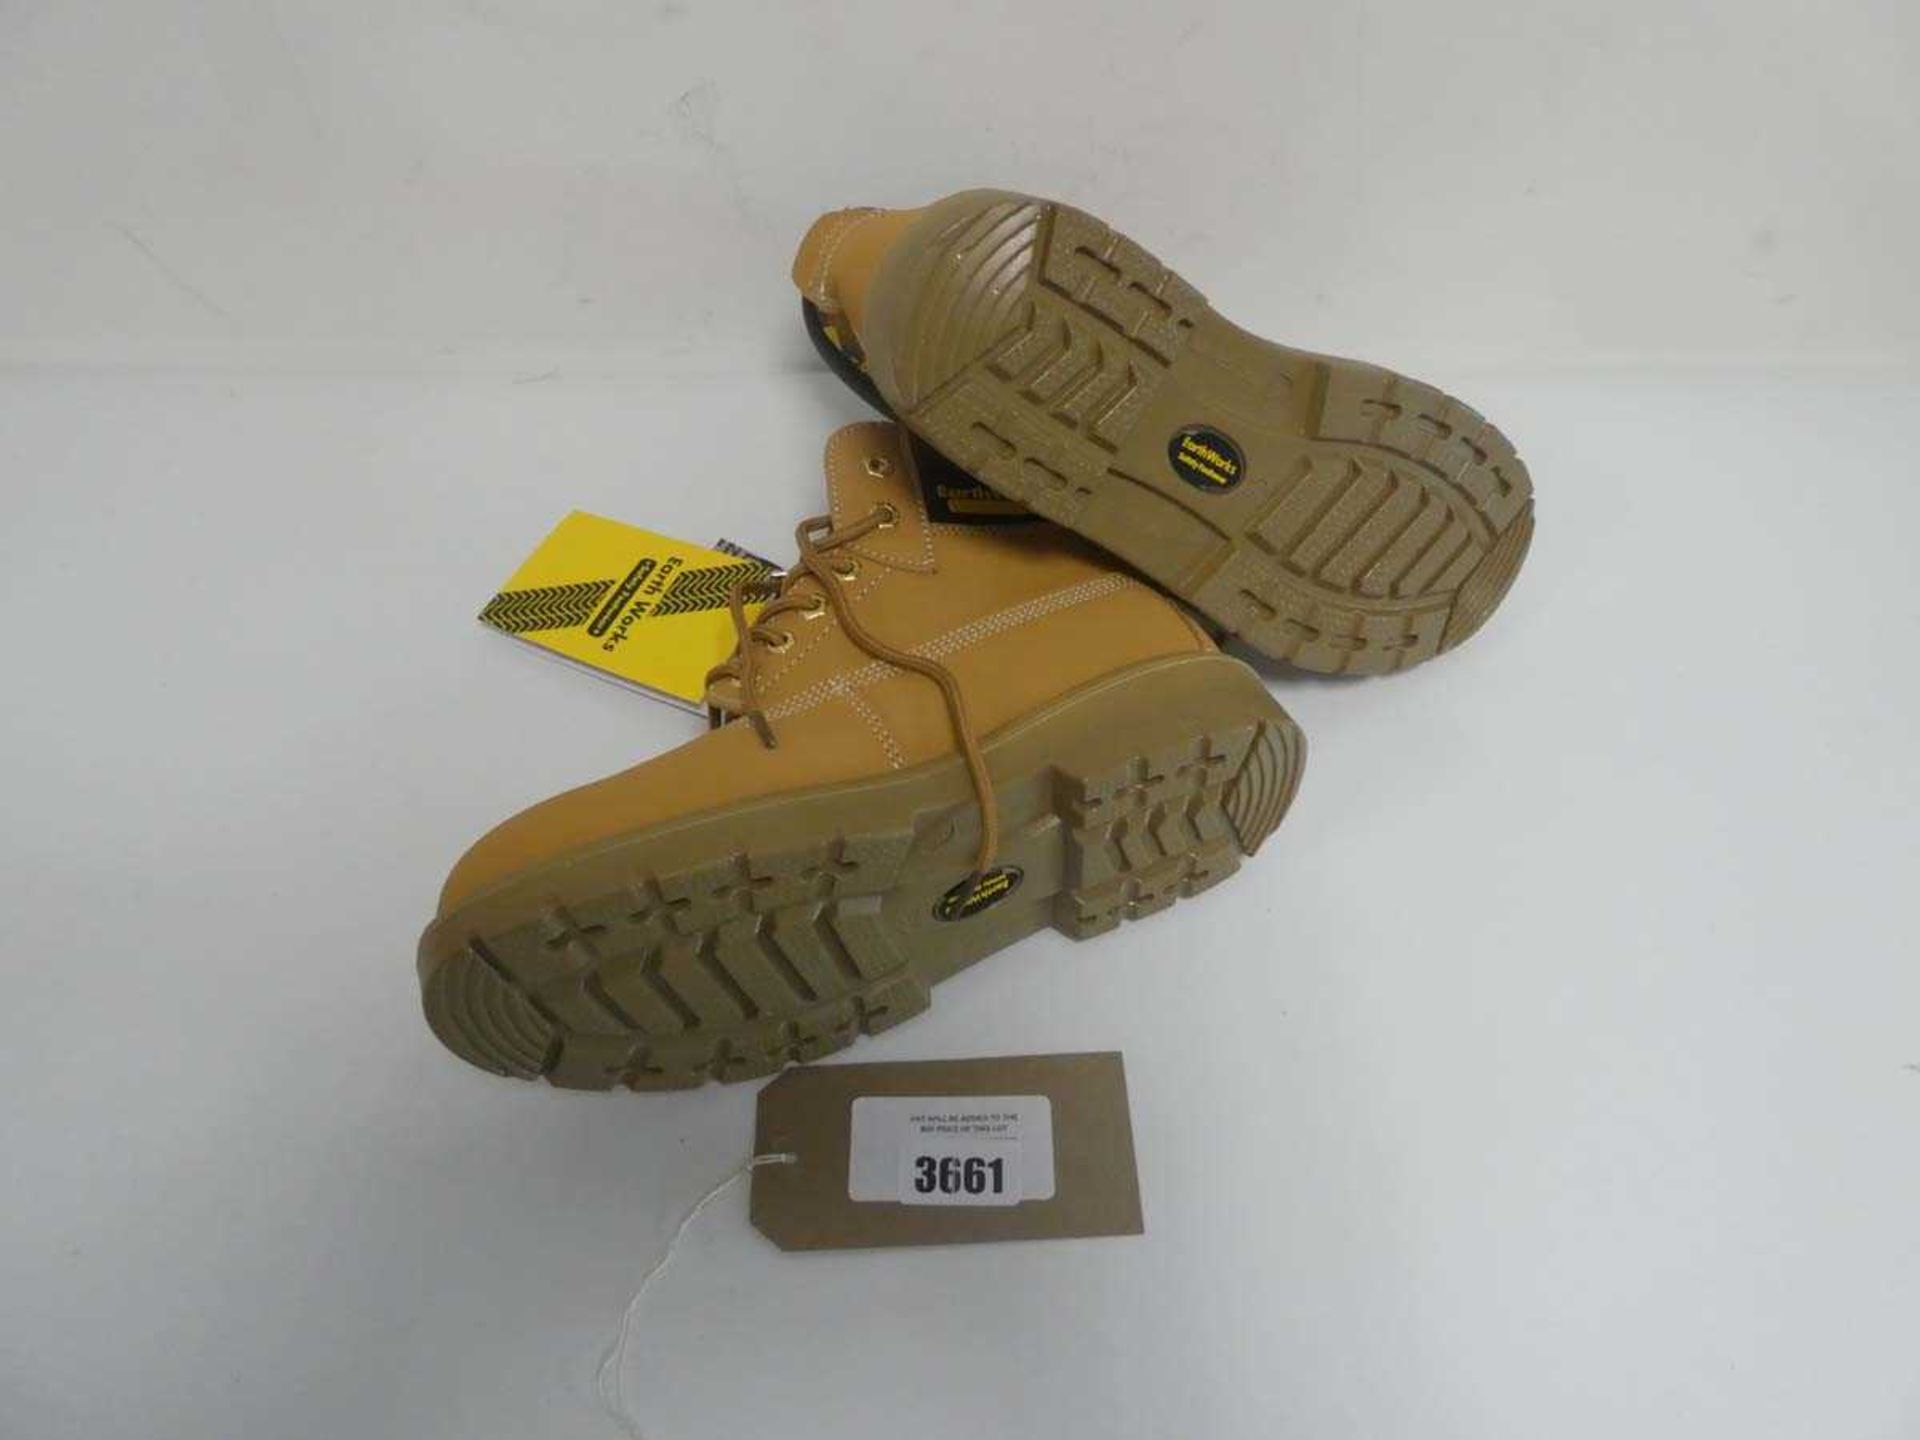 Earthworks safety footwear in Tan size UK6 - Image 2 of 2